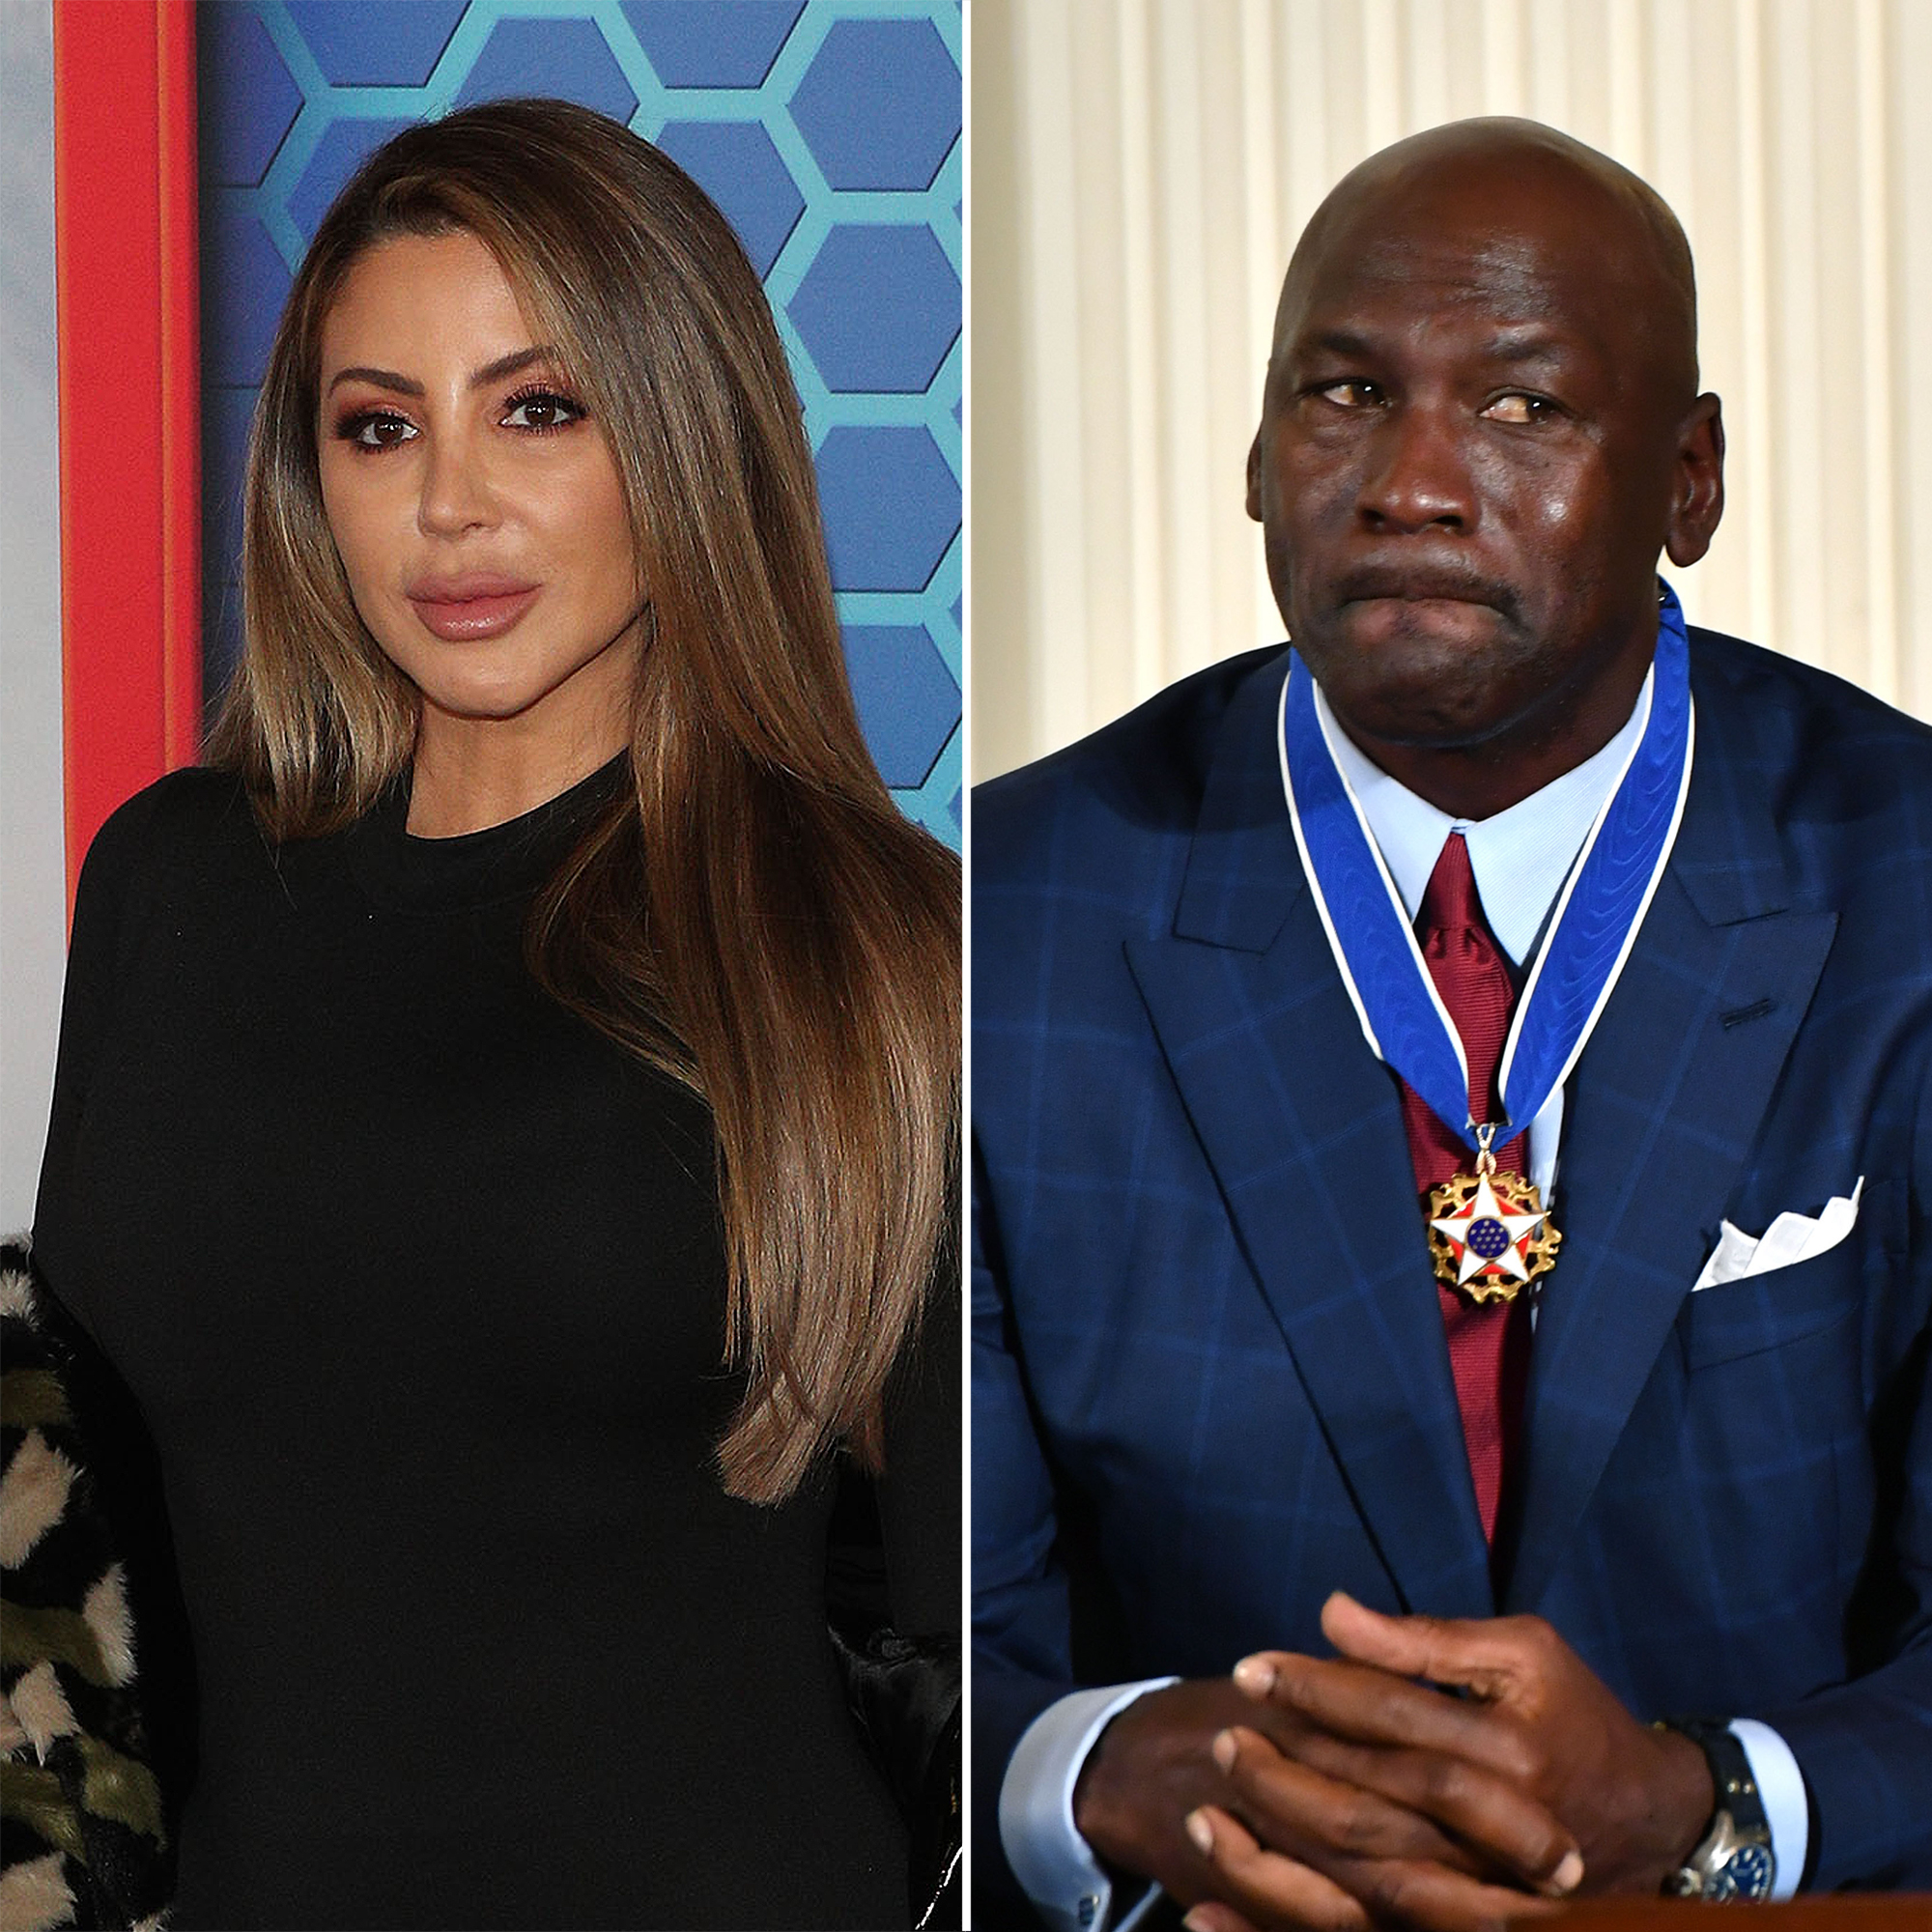 Larsa Pippen Reacts After Michael Jordan Weighs In on Marcus Romance